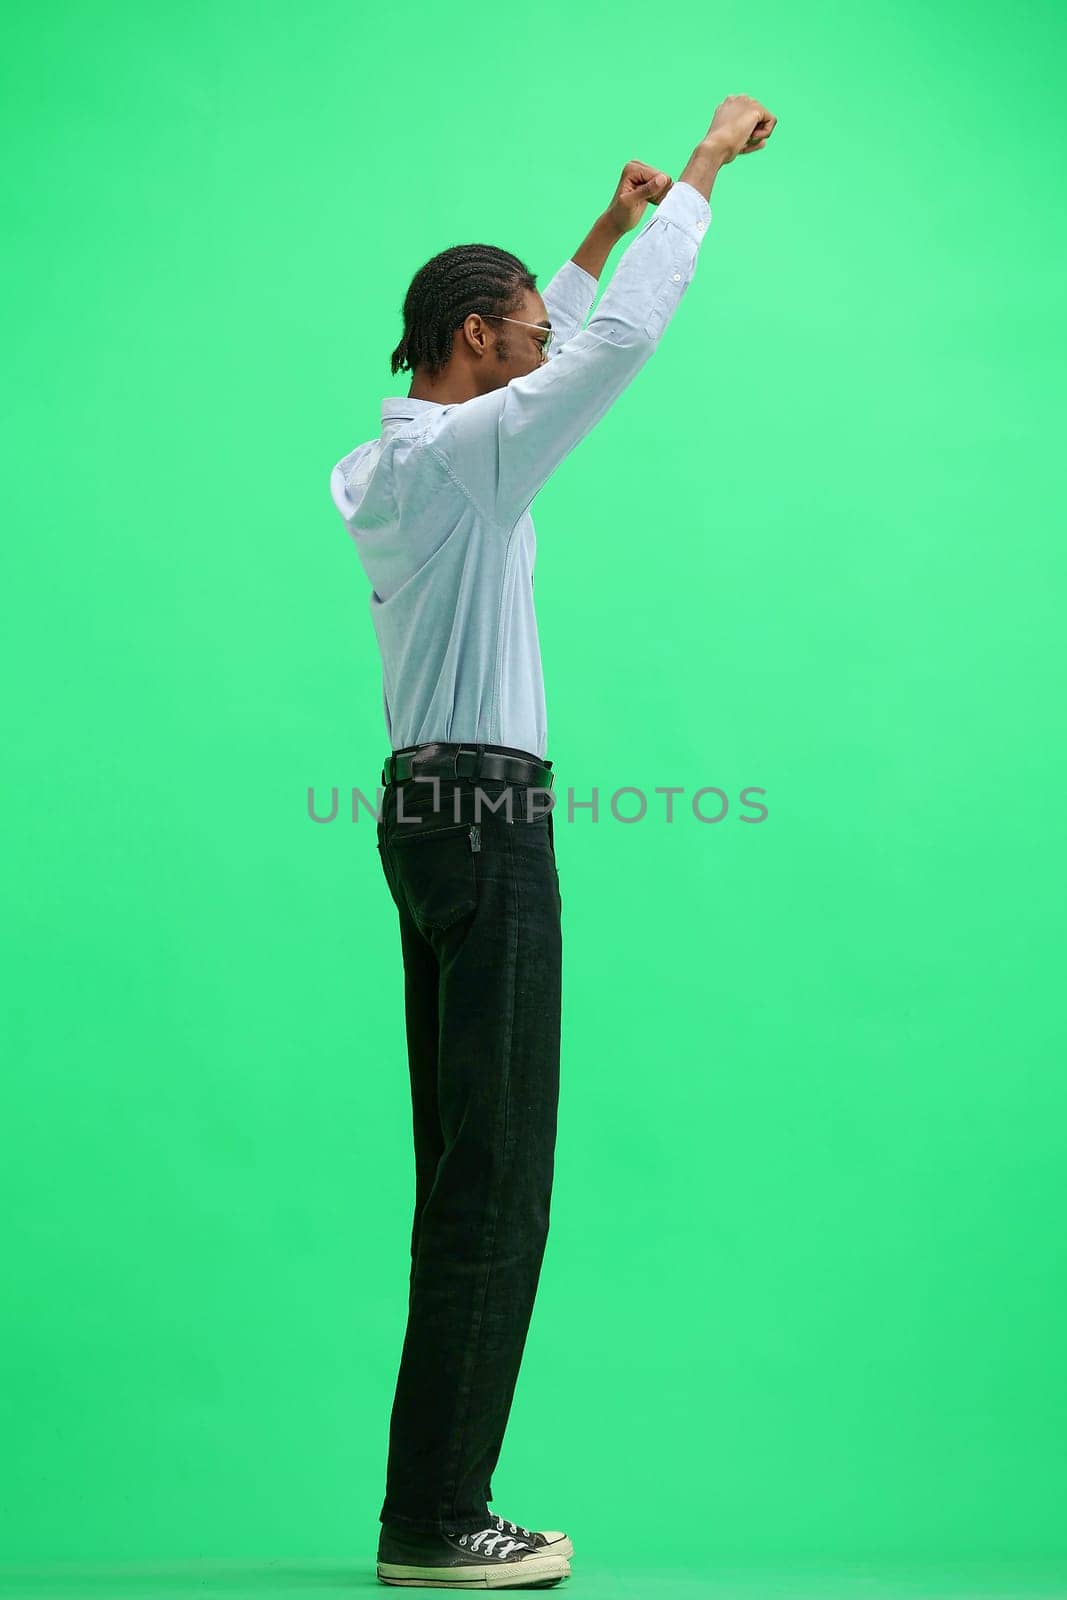 A man in a gray shirt, on a green background, in full height, raised his hands.